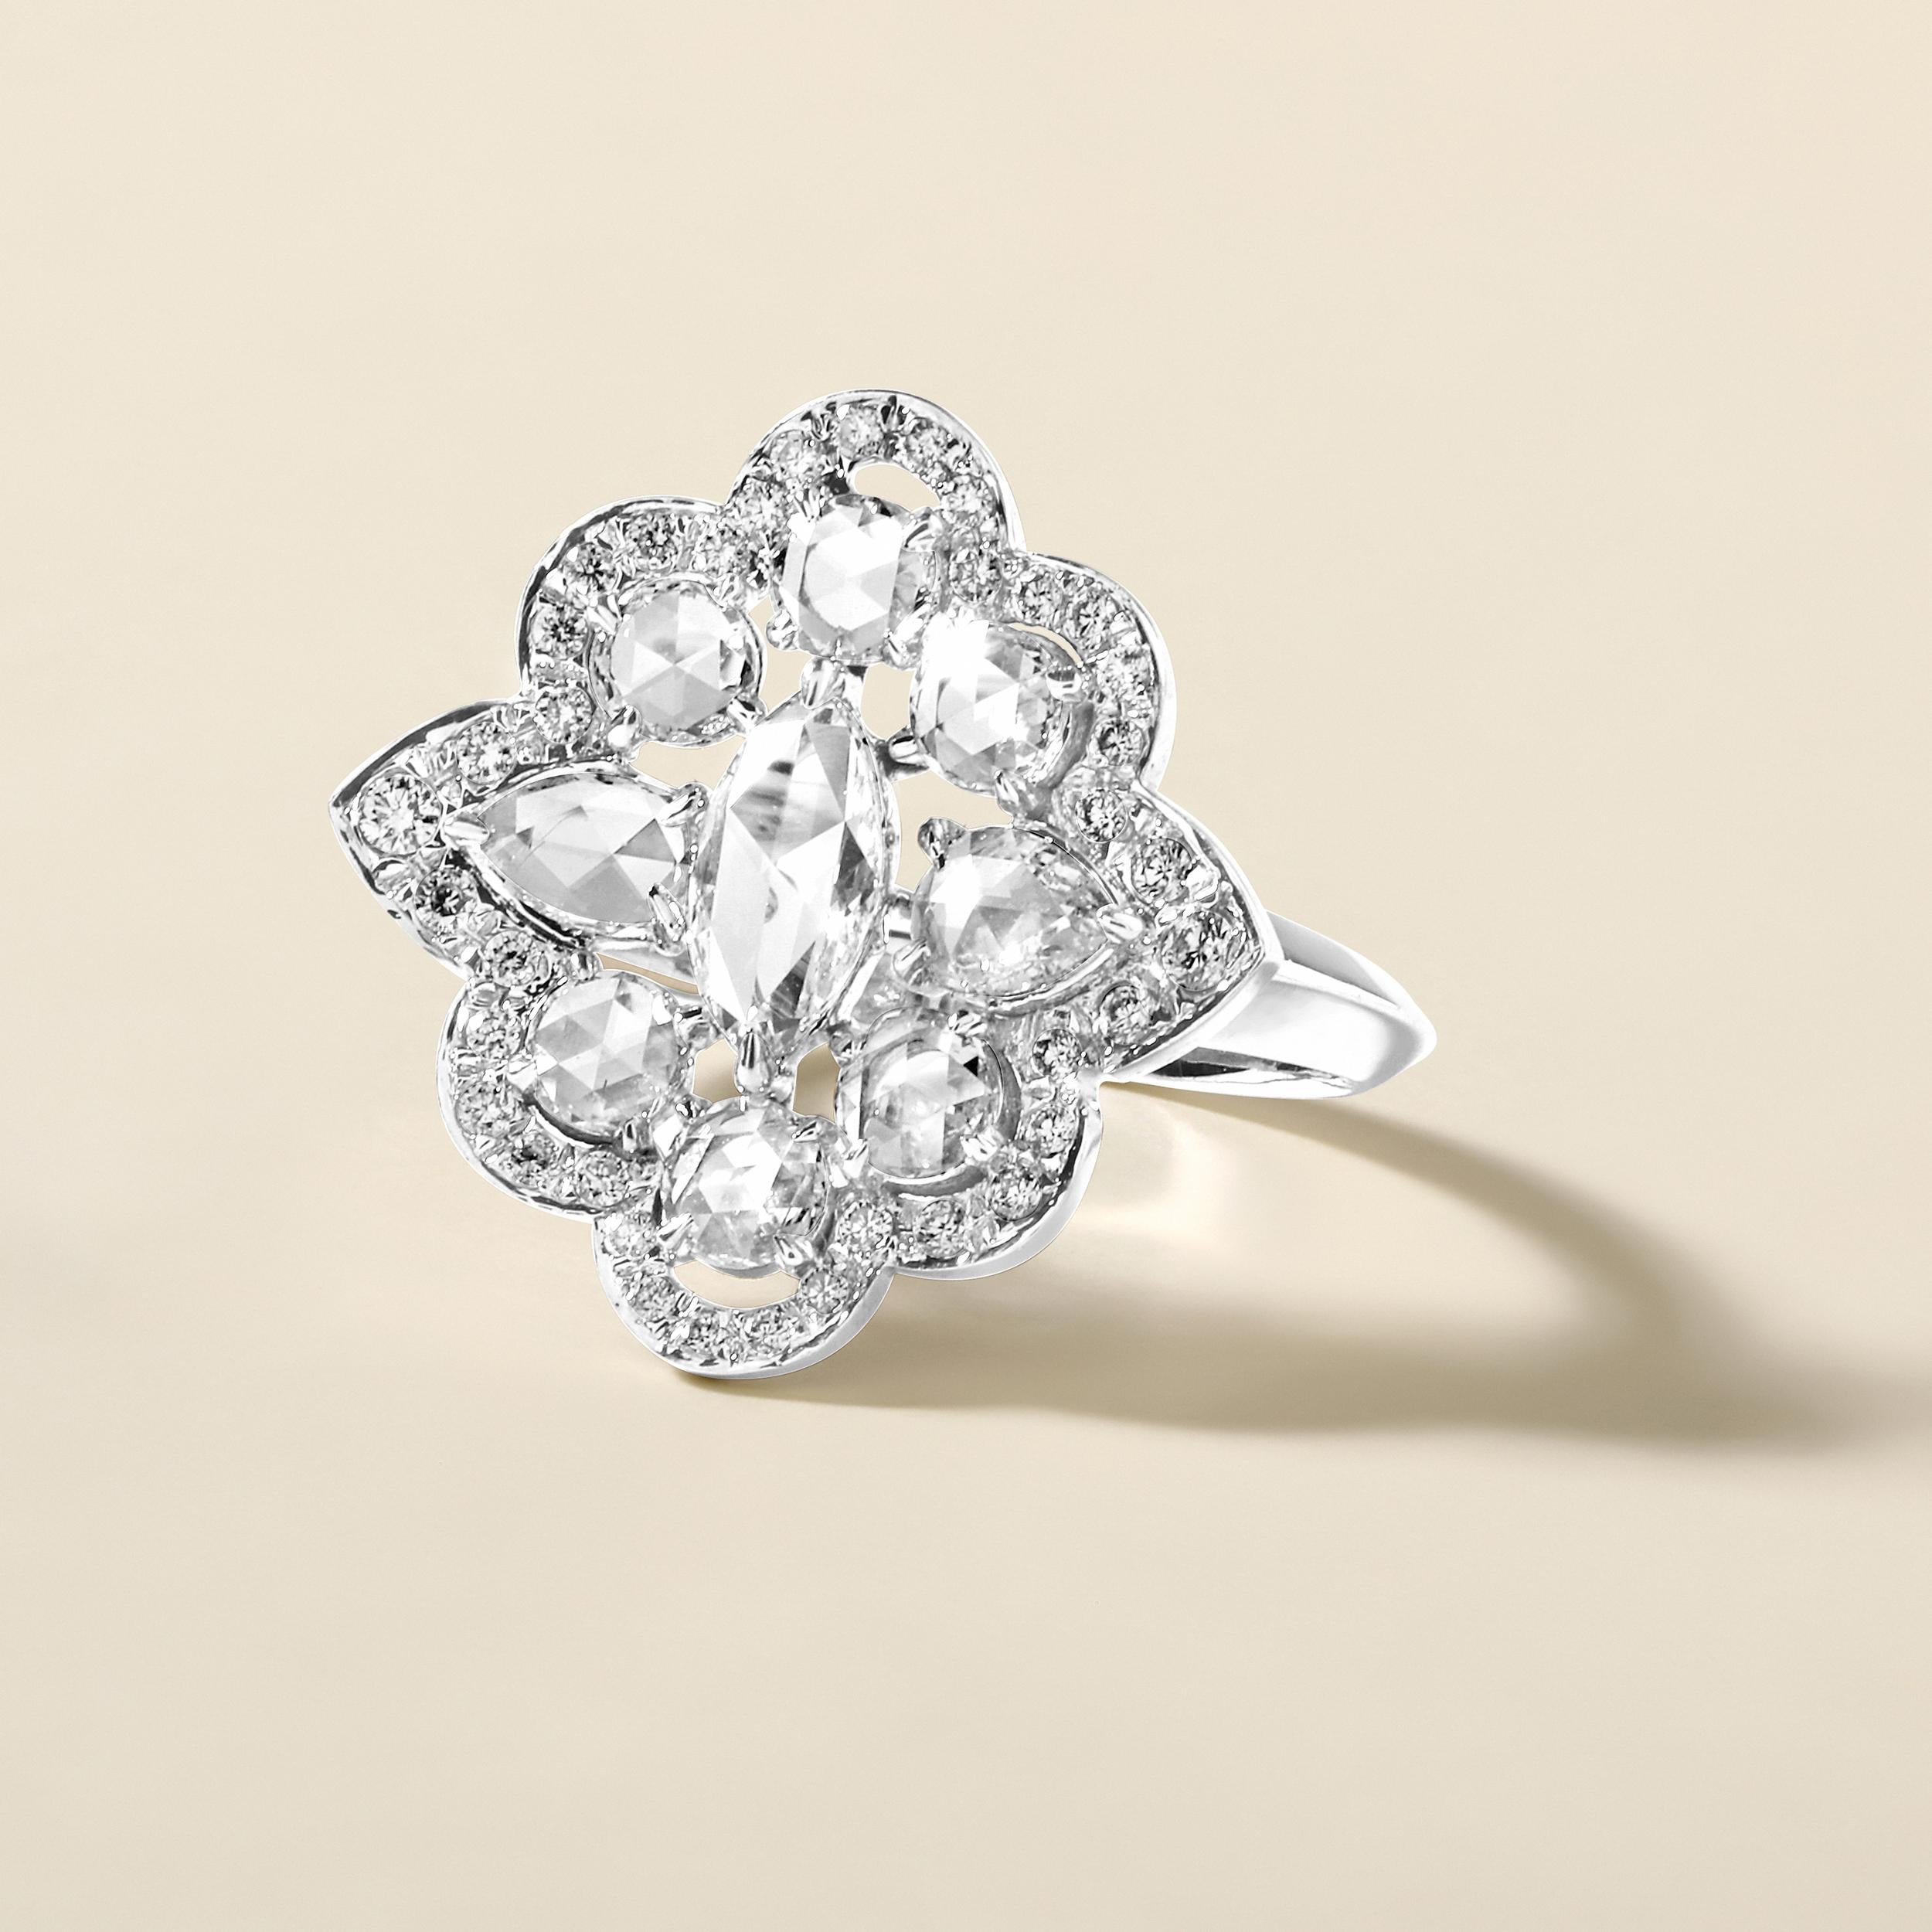 Ring Size: US 7

Crafted in 4.52 grams of 18K White Gold, the ring contains 9 stones of Rose Cut Natural Diamonds with a total of 0.89 carat in F-G color and VVS-VS clarity combined with 37 stones of Round Natural Diamonds with a total of 0.19 carat